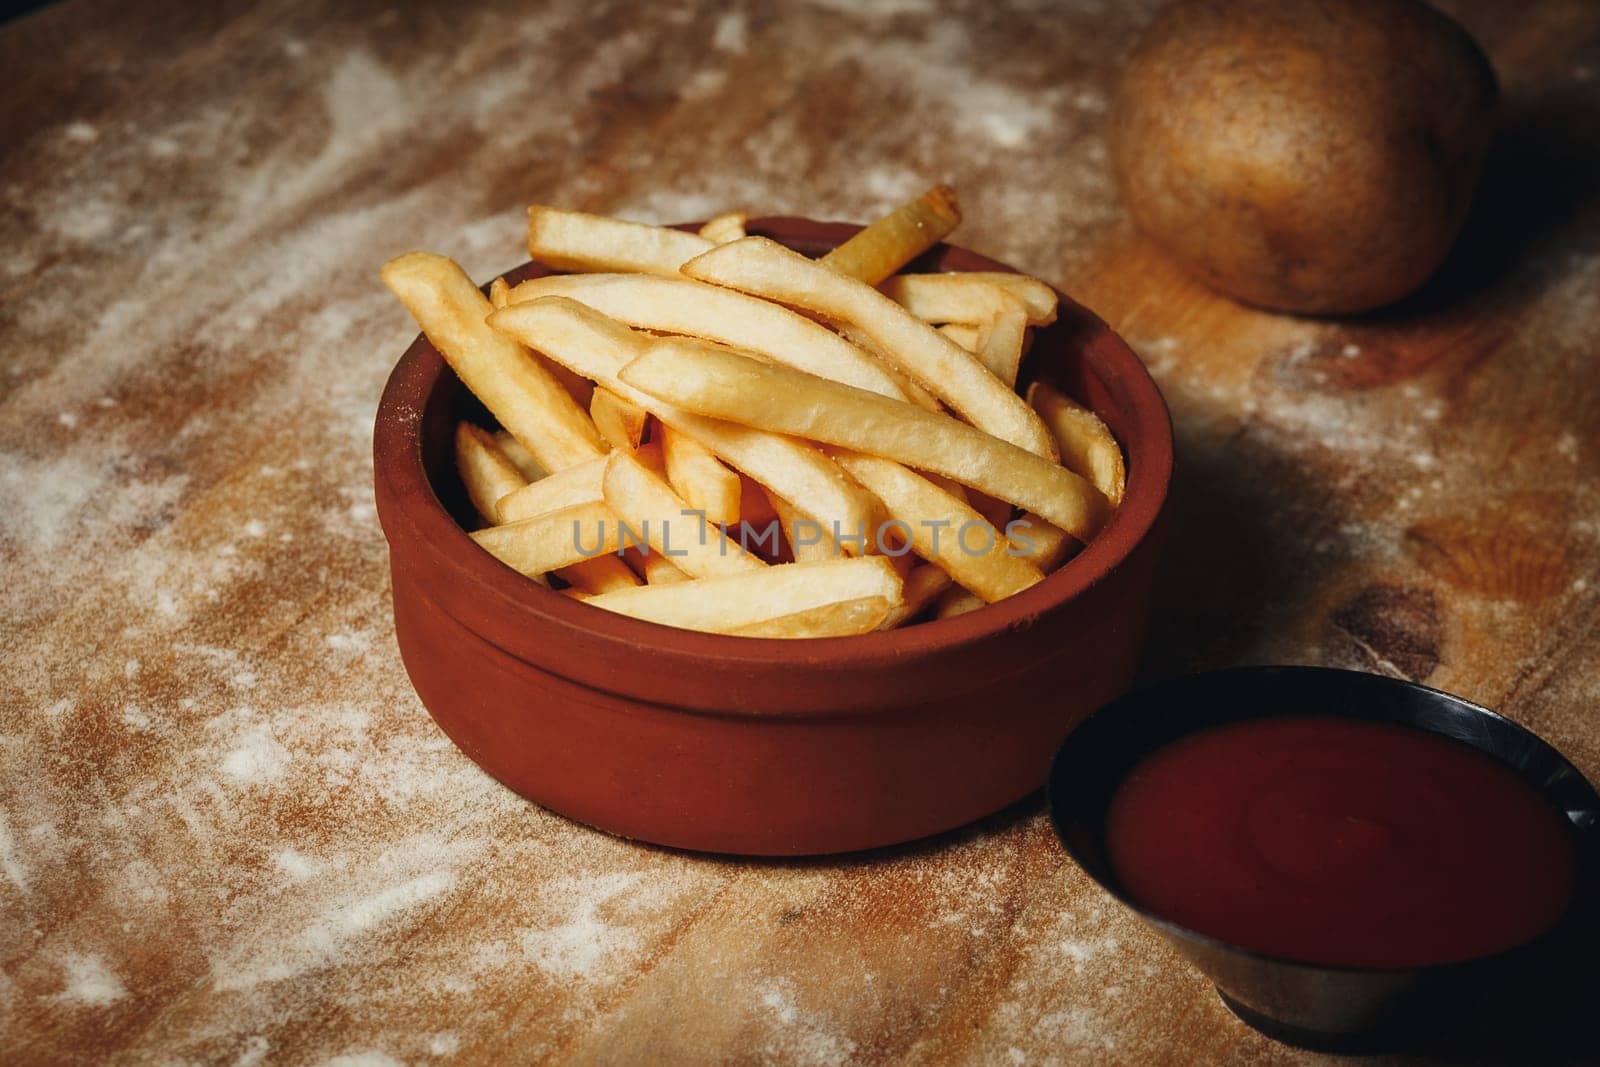 Golden French Fries in a Ceramic Bowl With Ketchup on a Textured Table by Miron